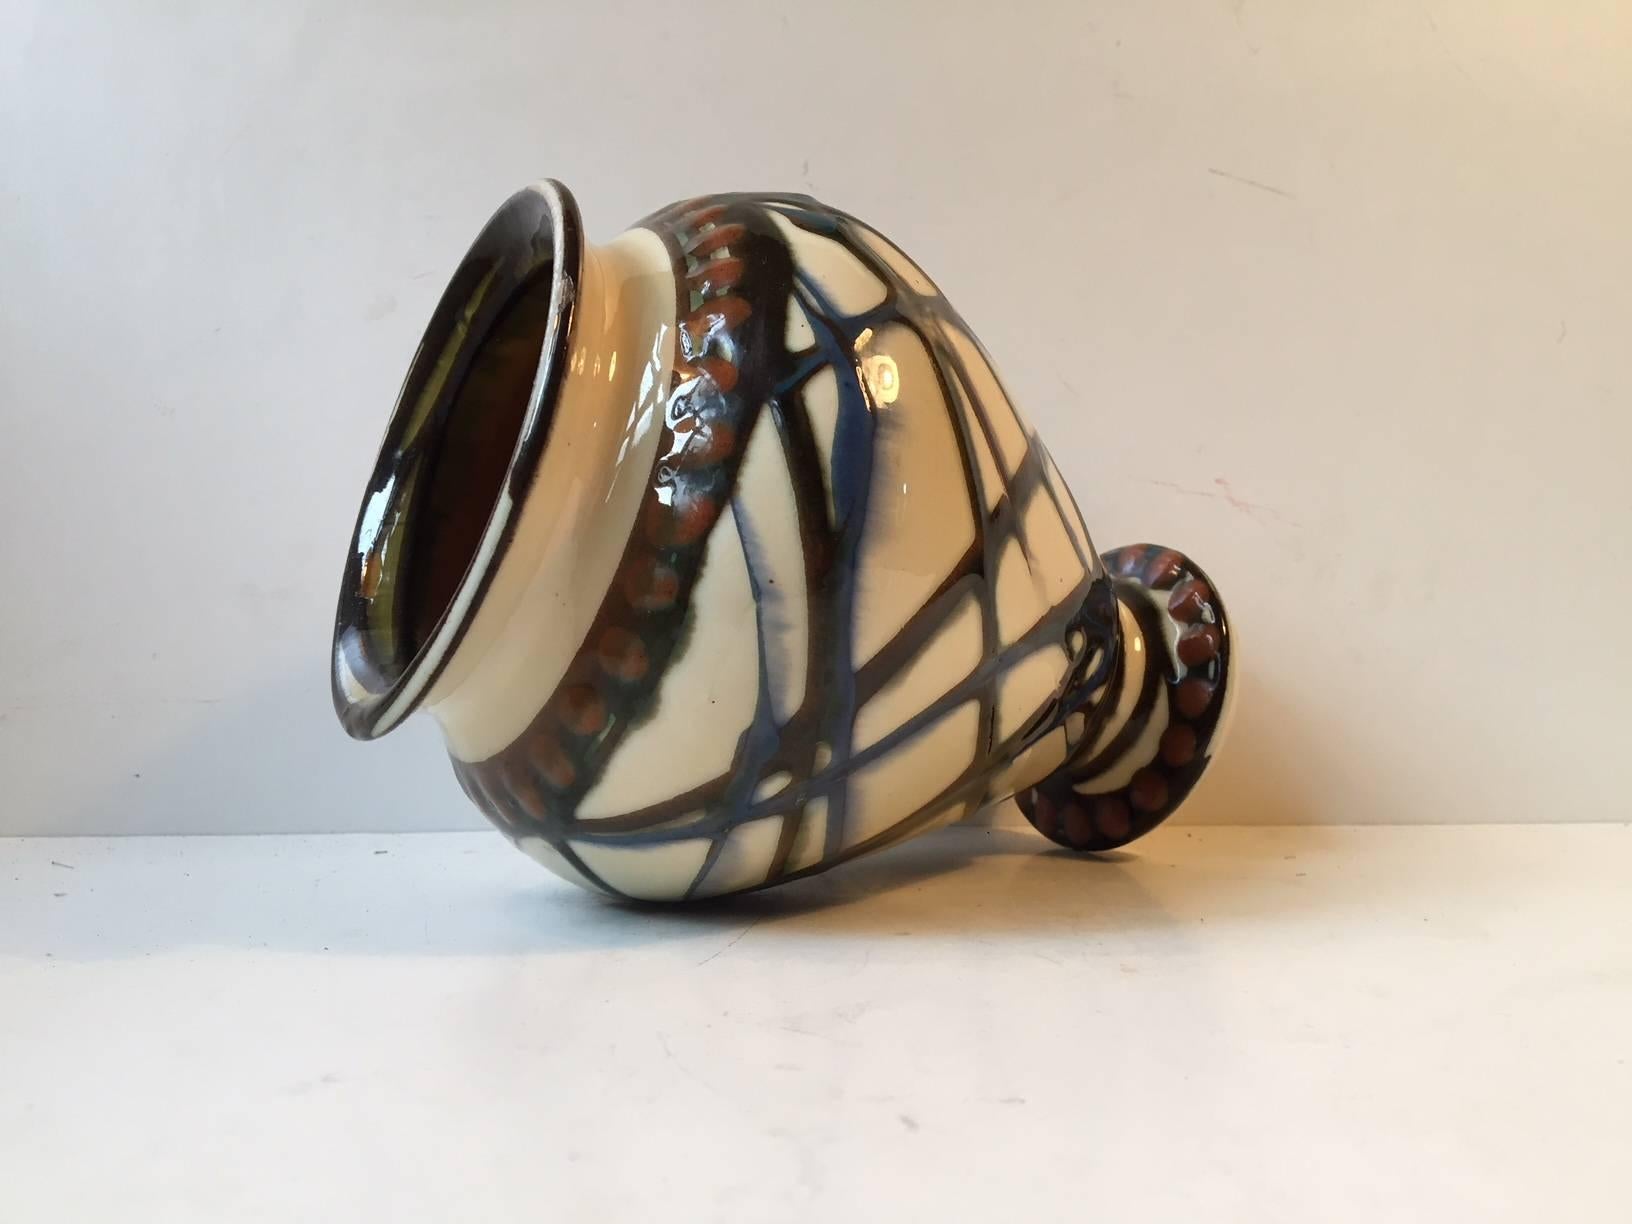 Glazed footed vase with swirling stripes and red dots by Herman August Kähler. Signed HAK - Denmark to the base. Splendid intact vintage/antique un-restored condition.